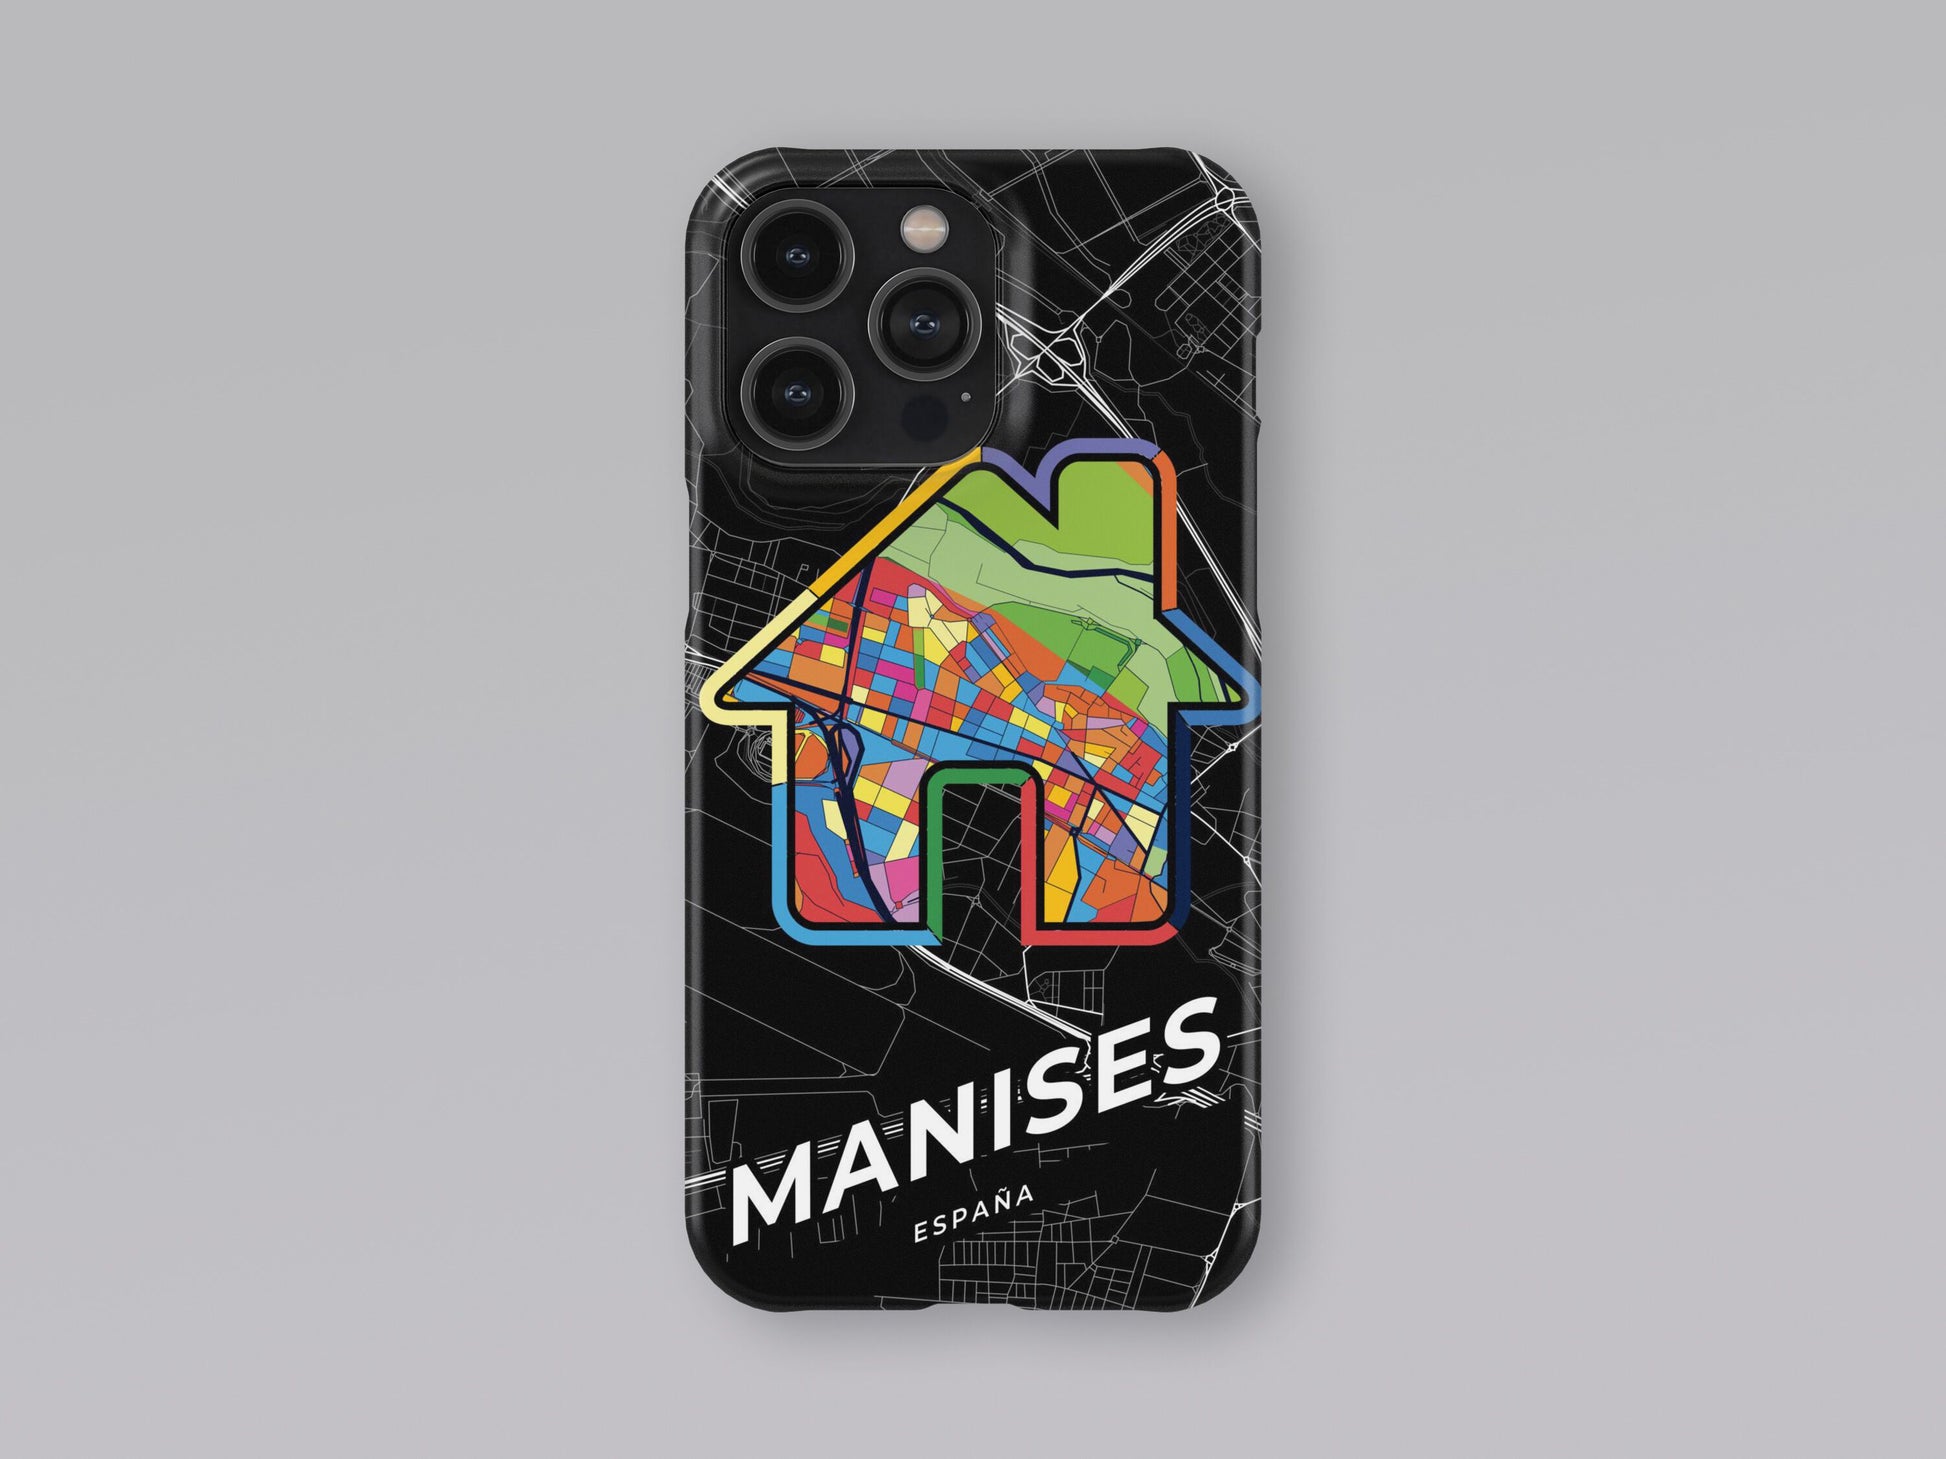 Manises Spain slim phone case with colorful icon. Birthday, wedding or housewarming gift. Couple match cases. 3